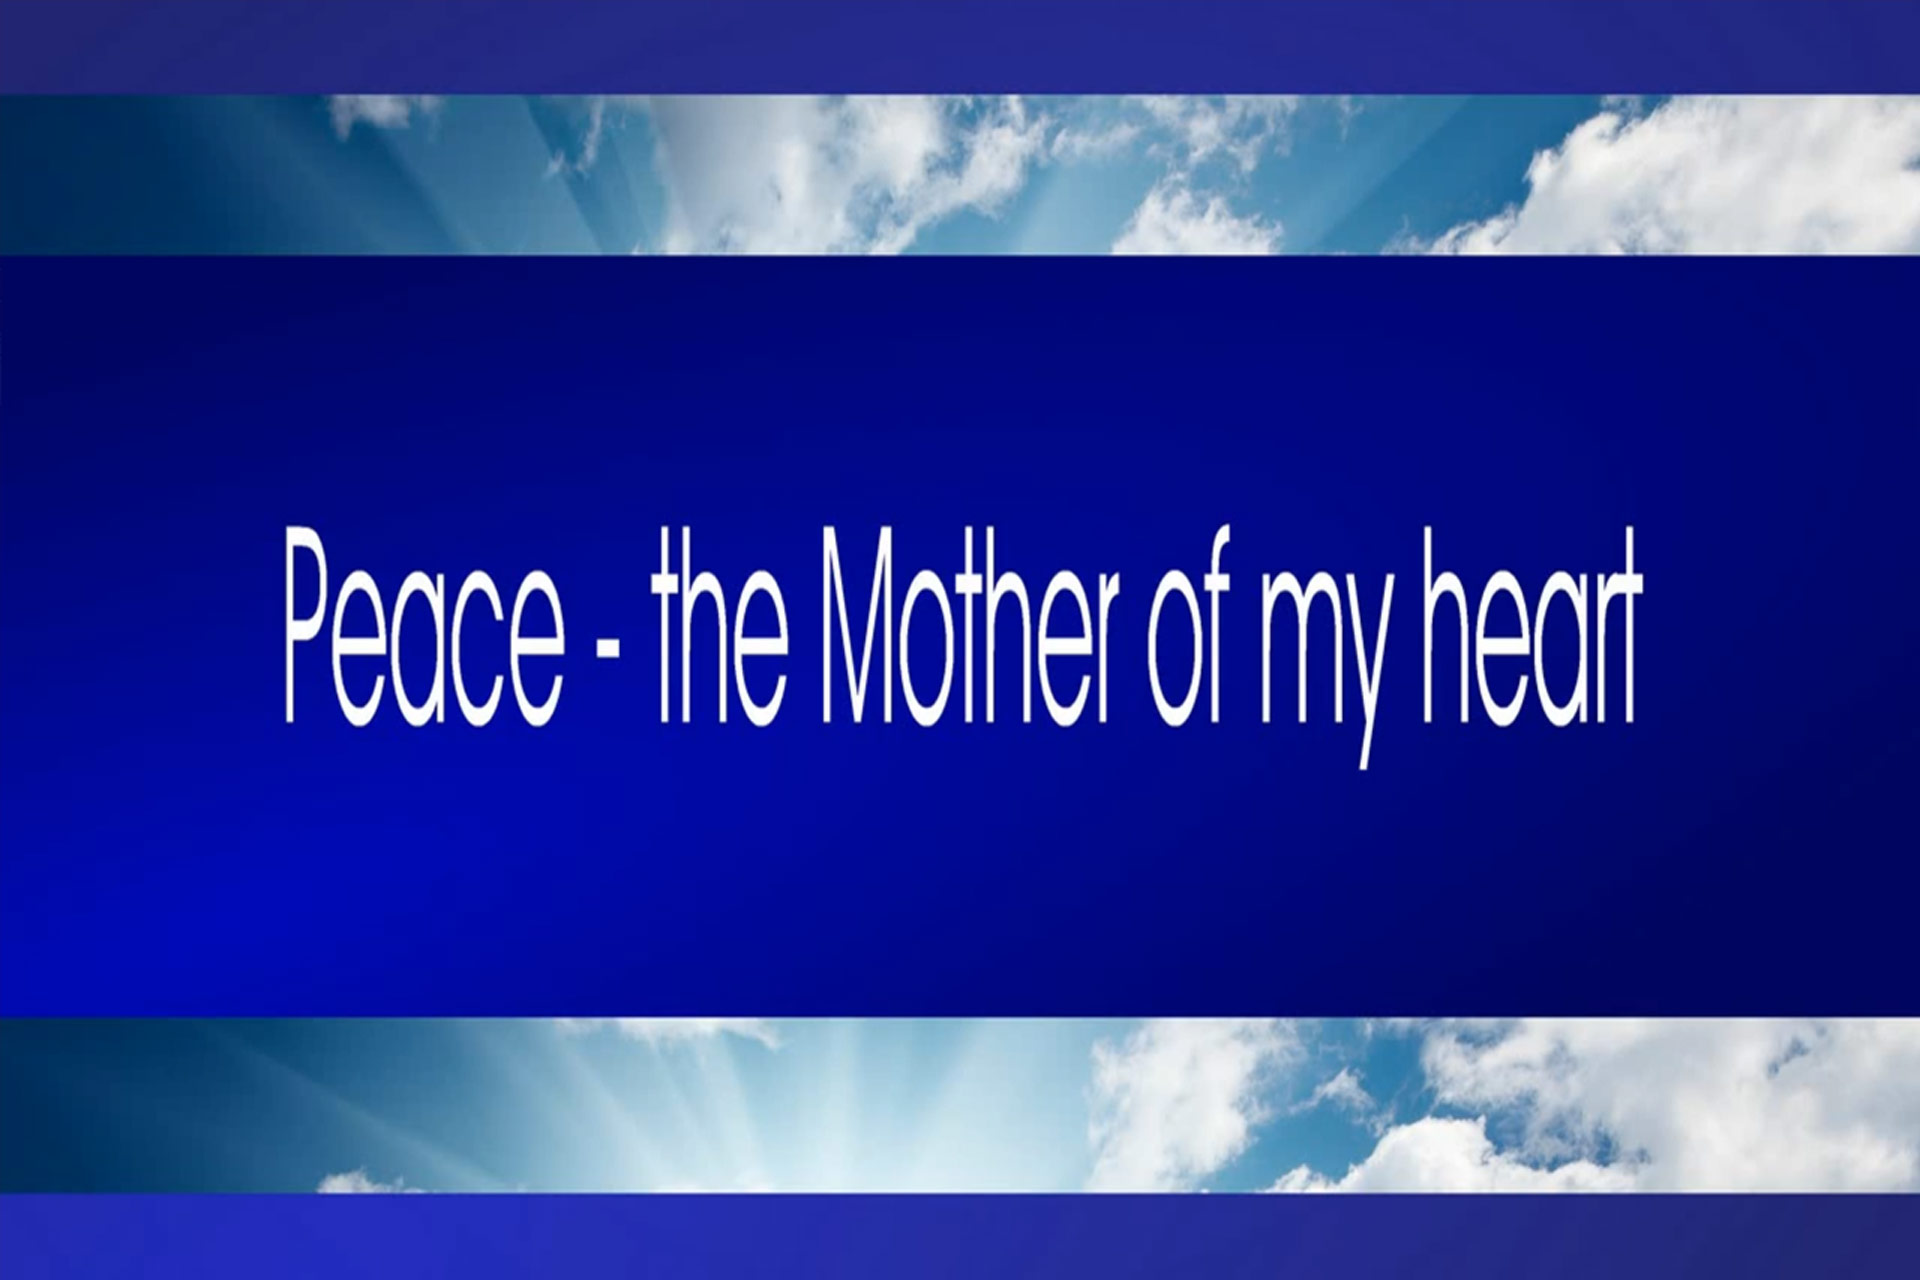 Peace - the Mother of my heart